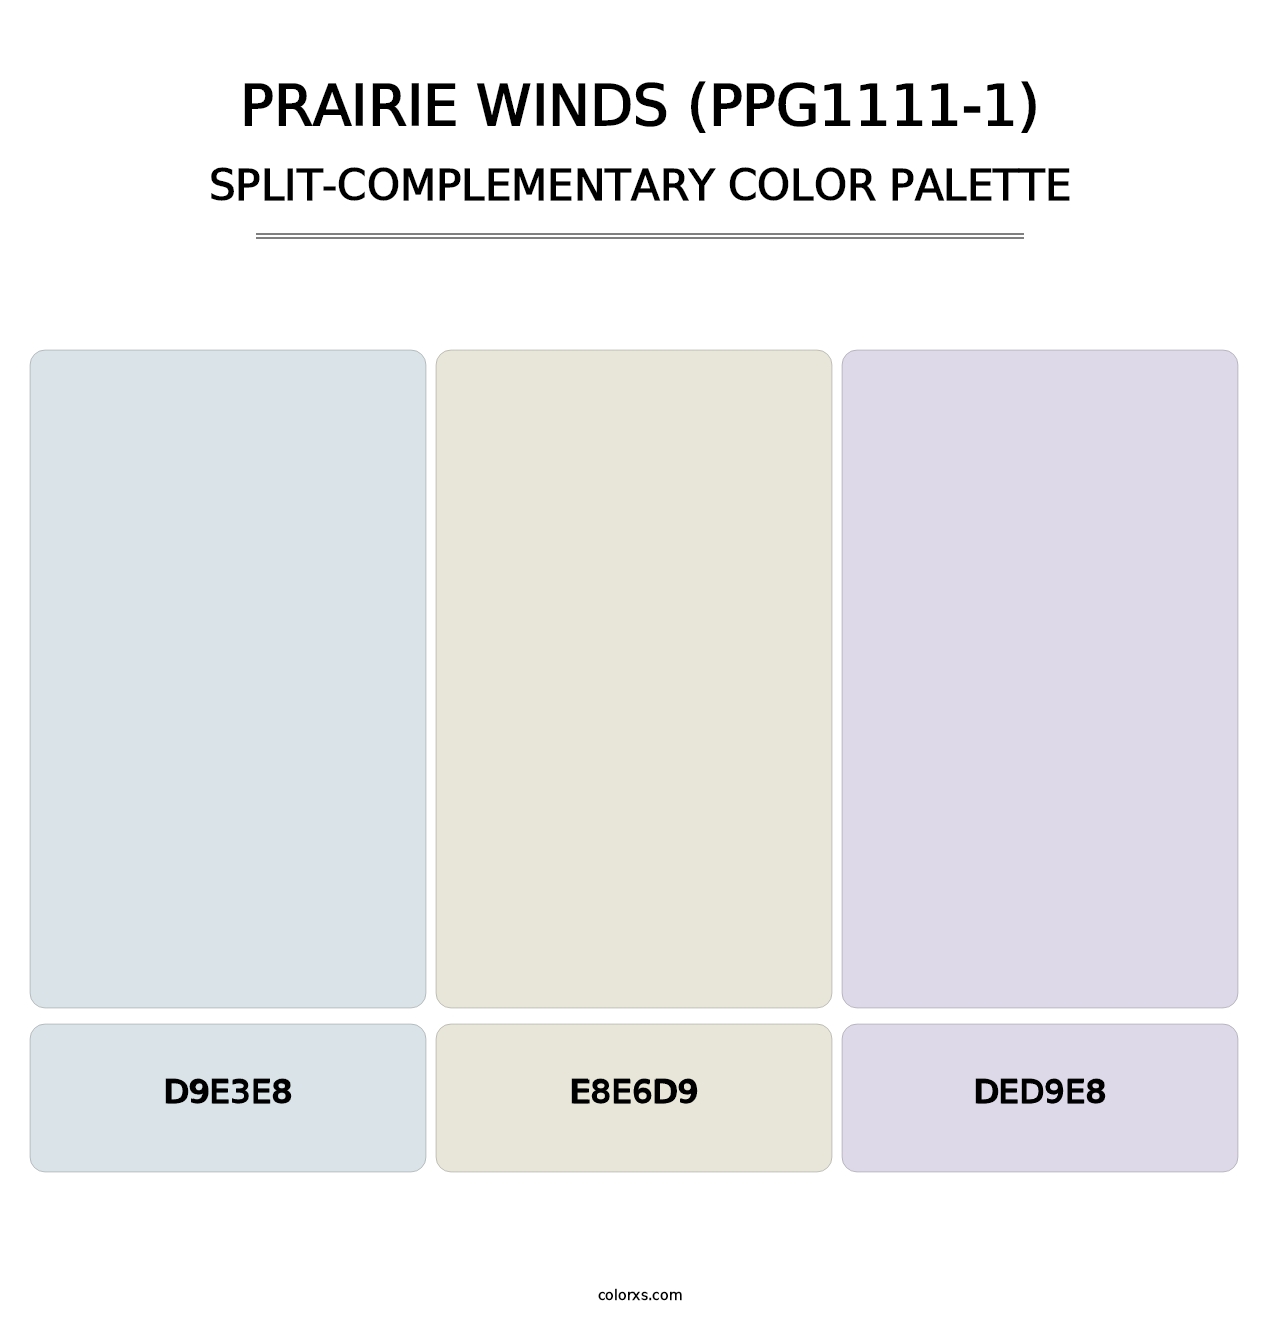 Prairie Winds (PPG1111-1) - Split-Complementary Color Palette